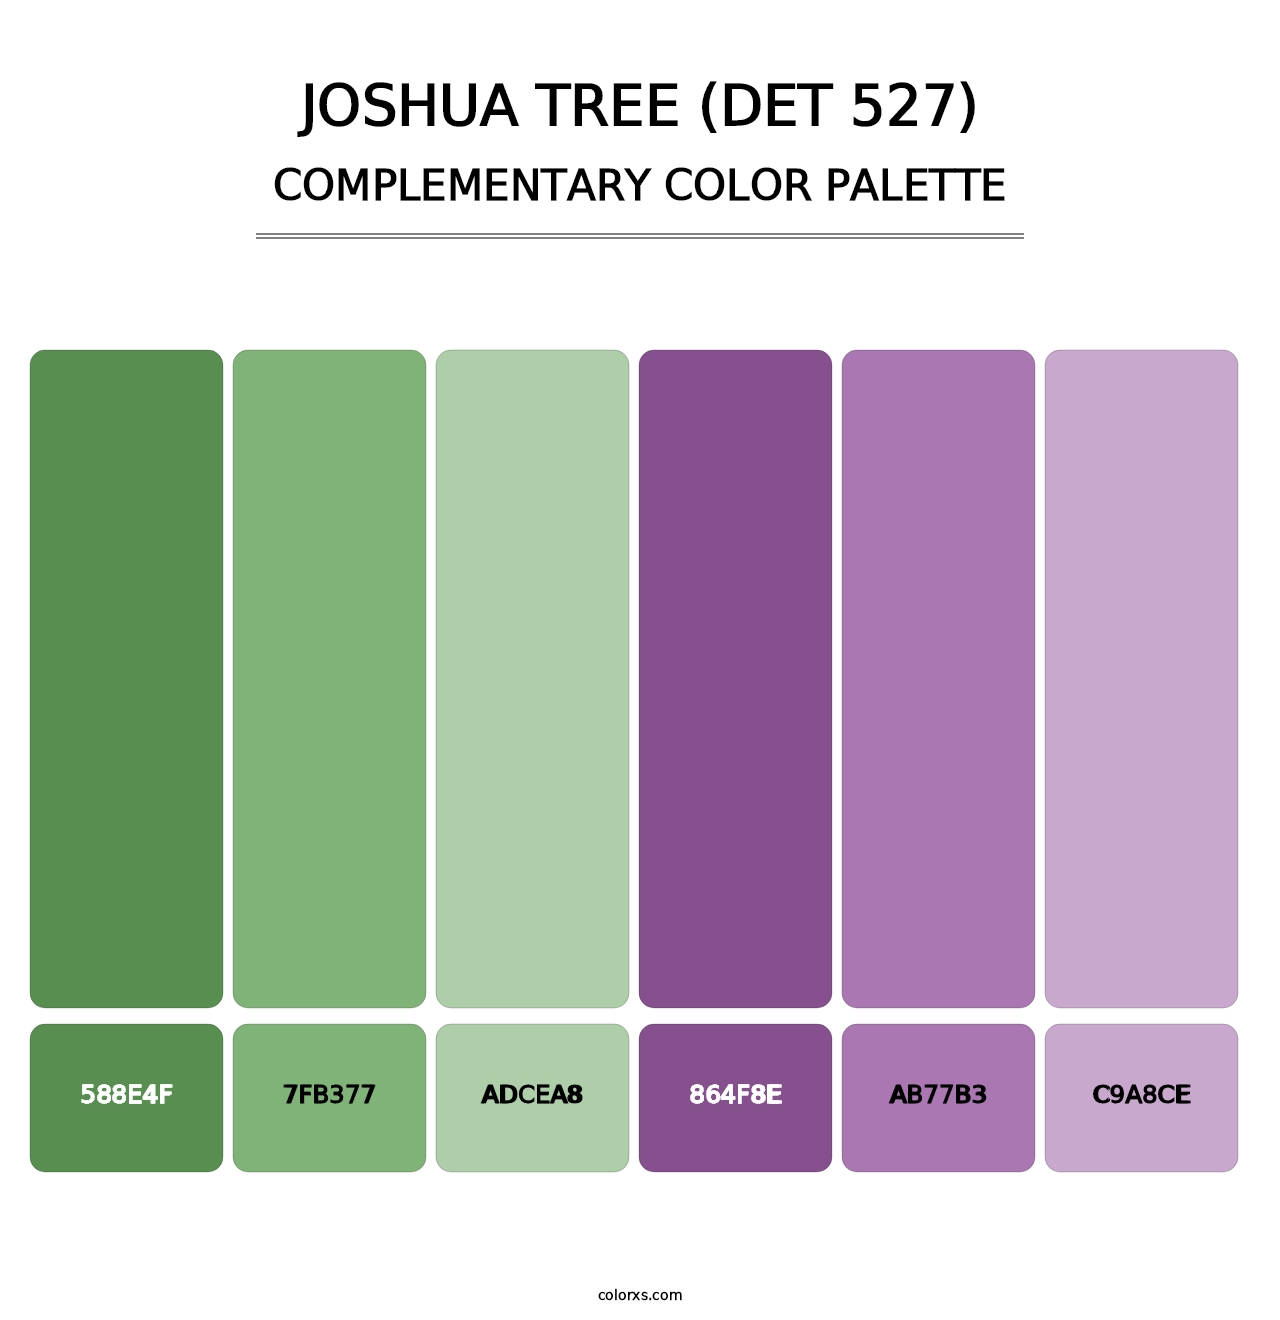 Joshua Tree (DET 527) - Complementary Color Palette